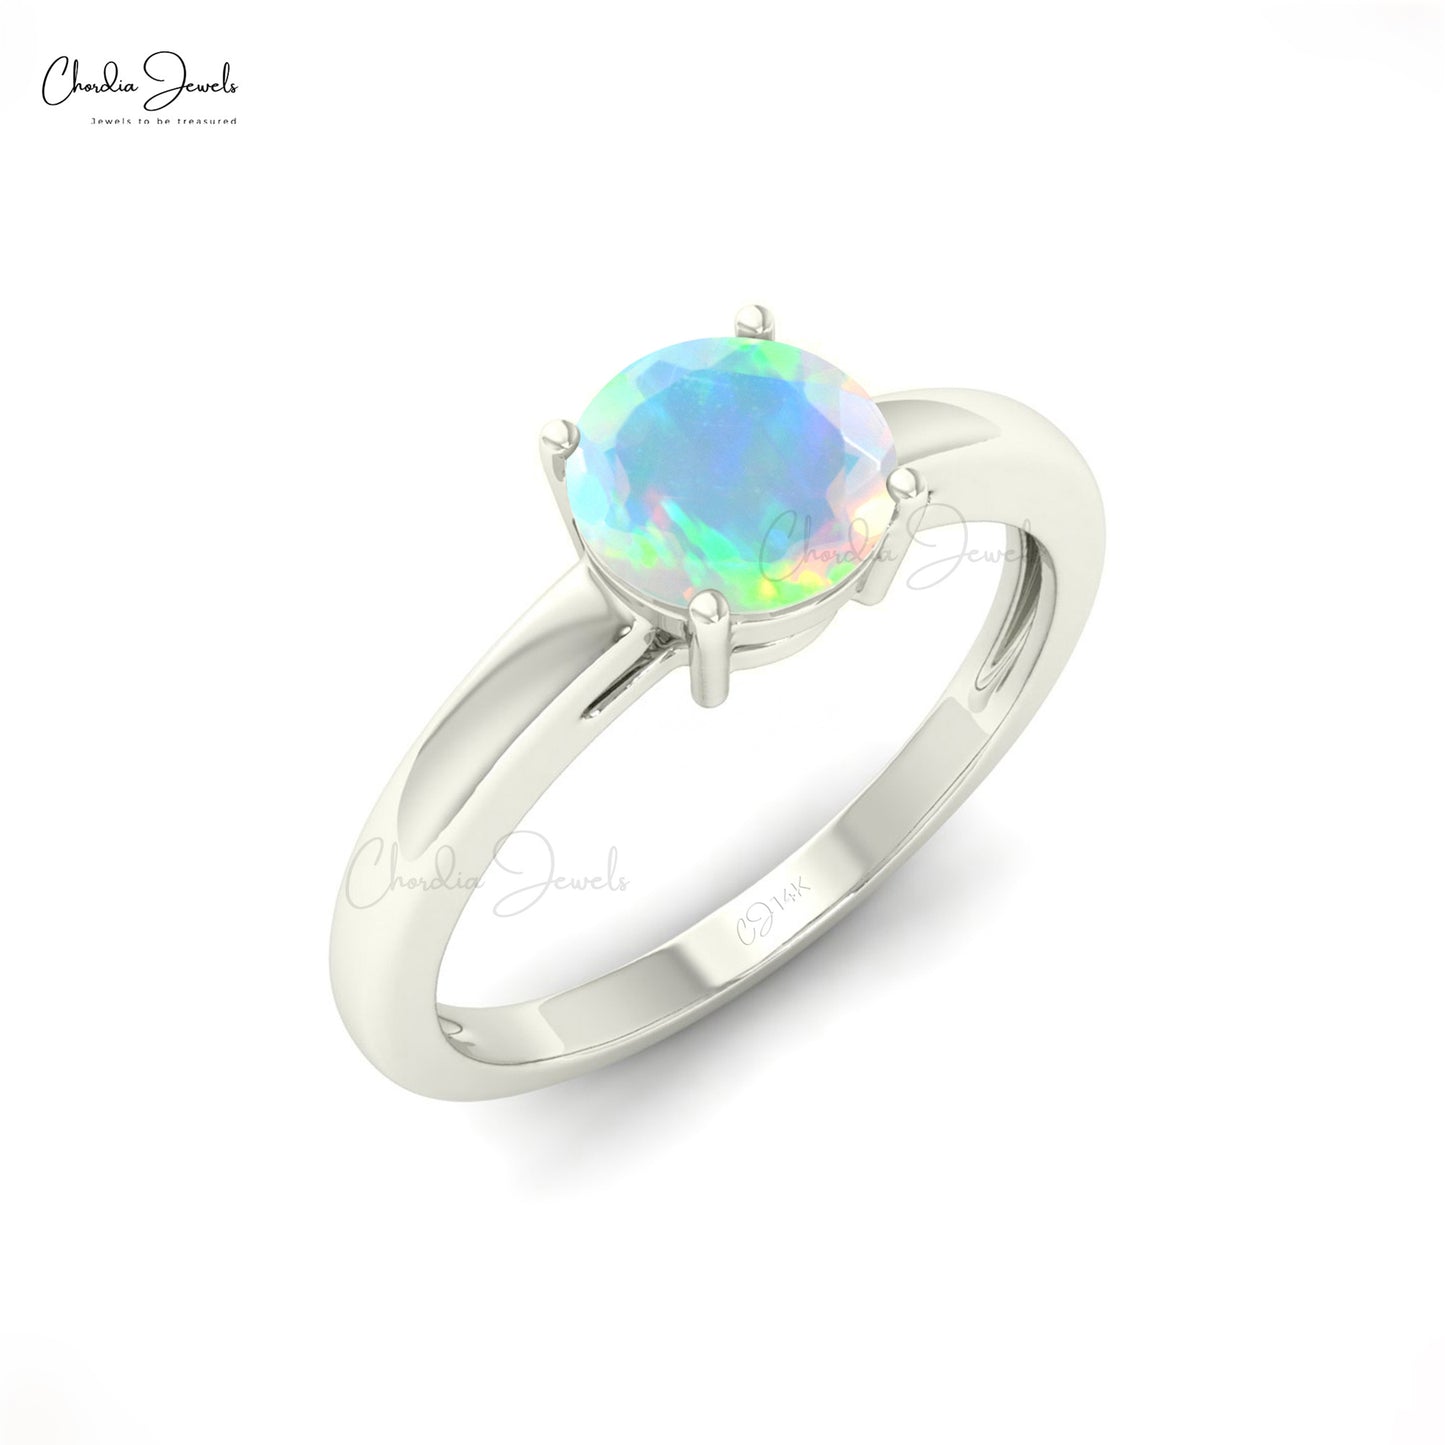 Natural 6mm Round Cut Ethiopian Opal Solitaire Ring For Her, 14k Solid Gold Sharing Prong Gemstone Ring For Gift